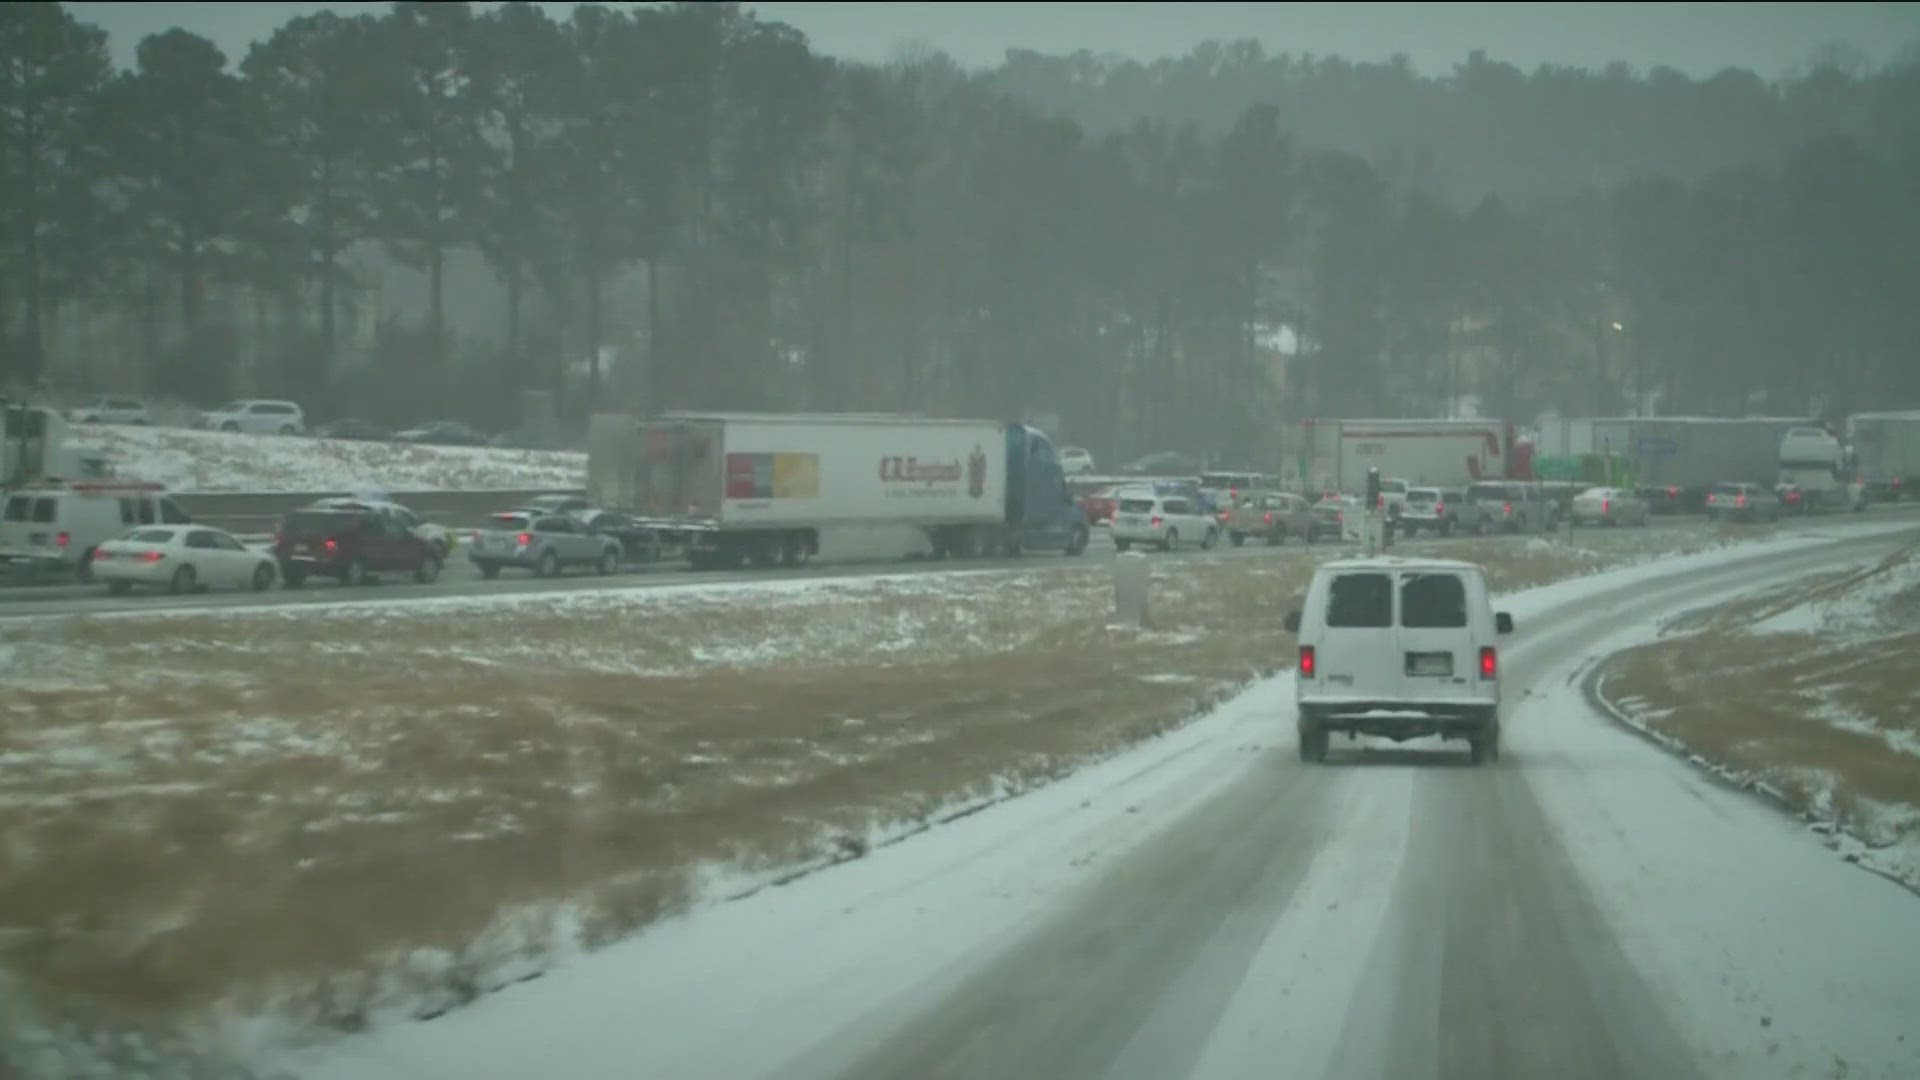 The weekend before the 2014 storm – meteorologists were watching a system that would bring wintry weather to parts of Georgia.